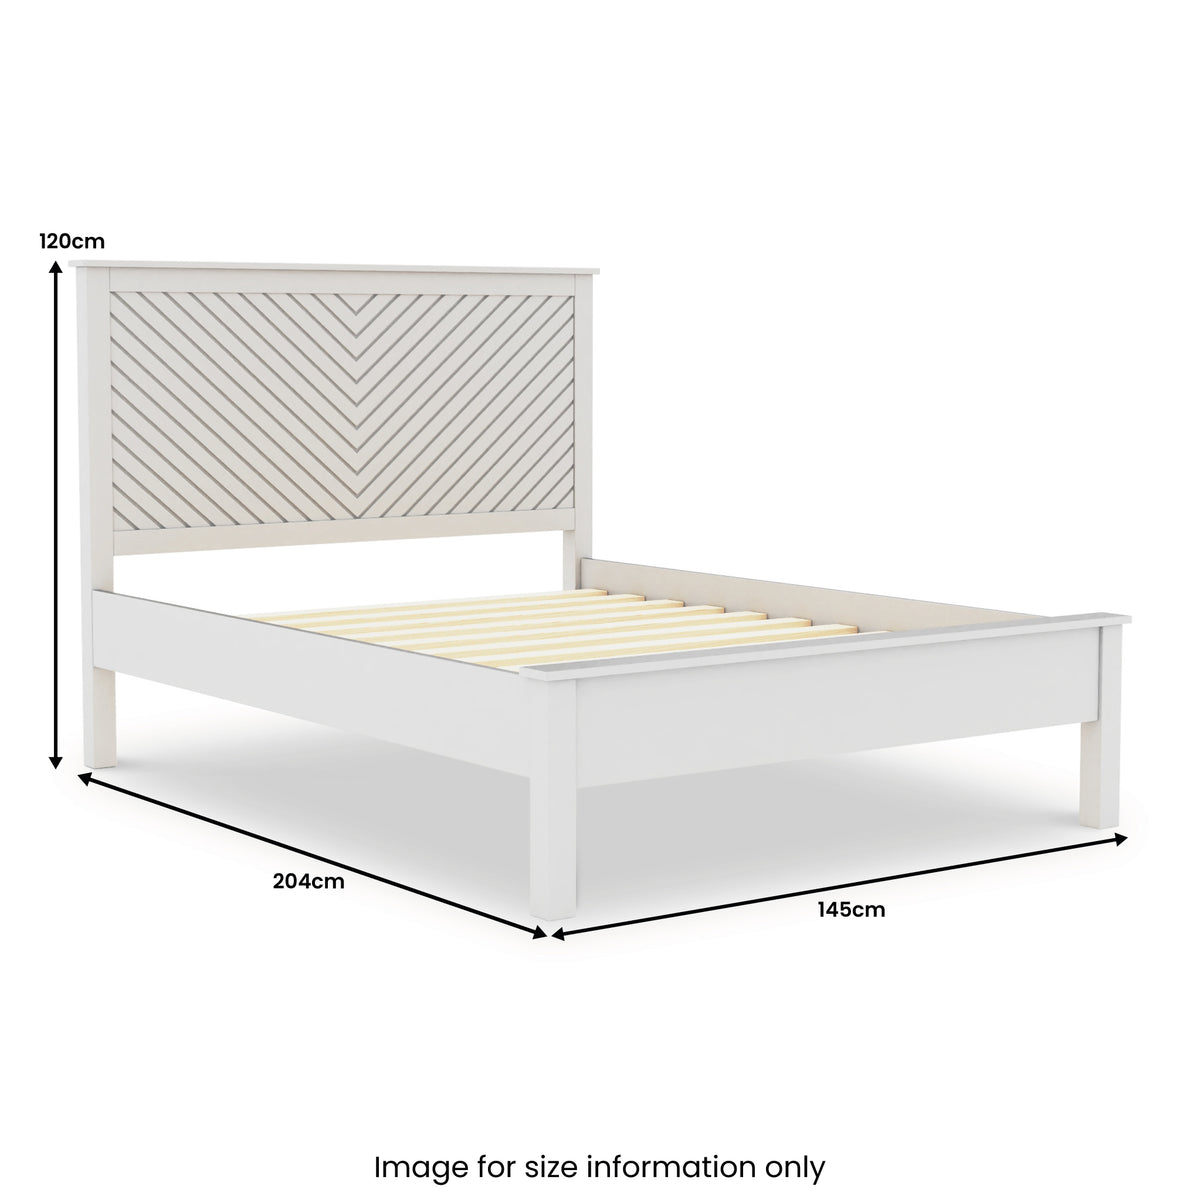 Wotton Chevron Bed Frame - double dimensions